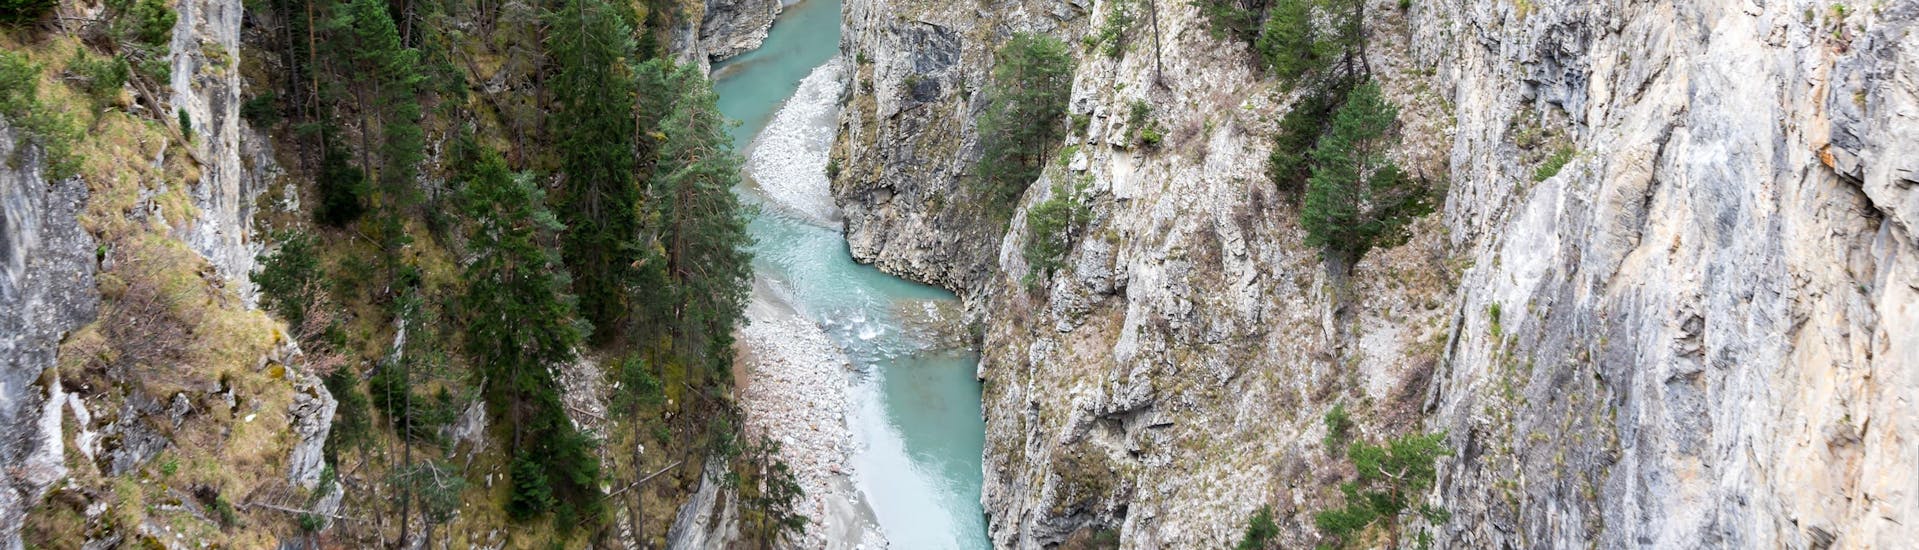 View of a gorge in the Annecy area where it is possible to do canyoning.